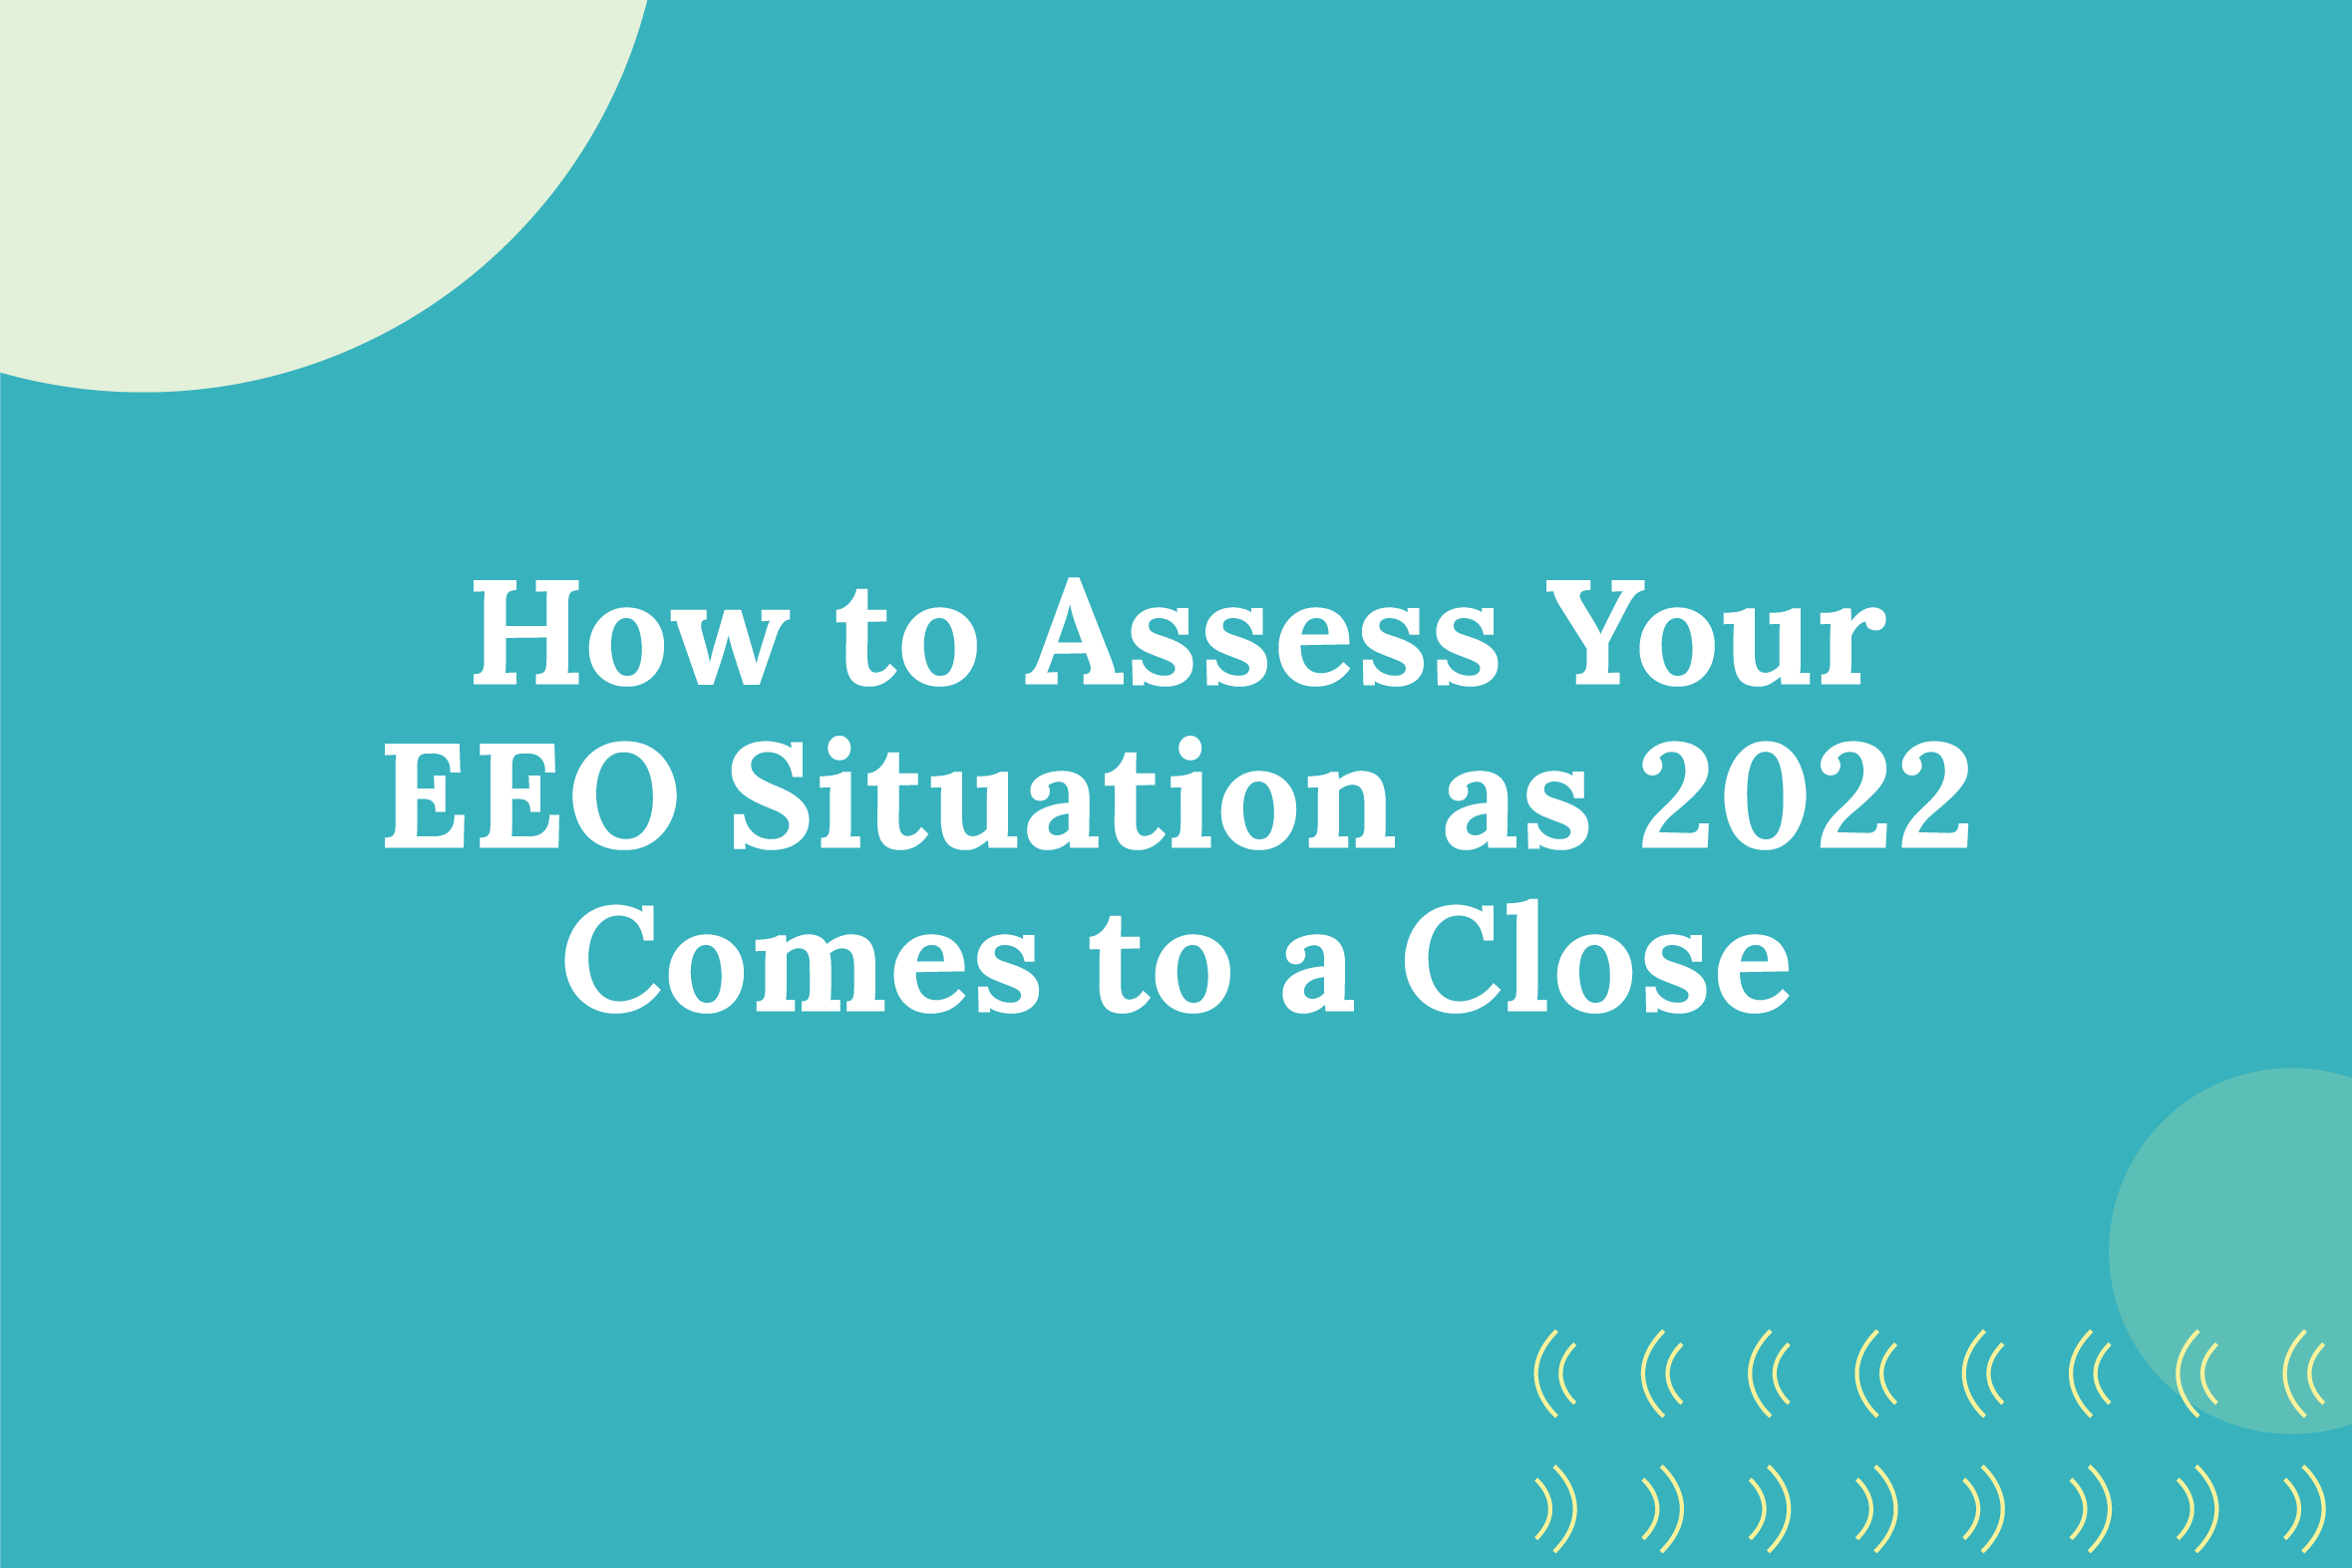 How to Assess Your EEO Situation as 2022 Comes to a Close